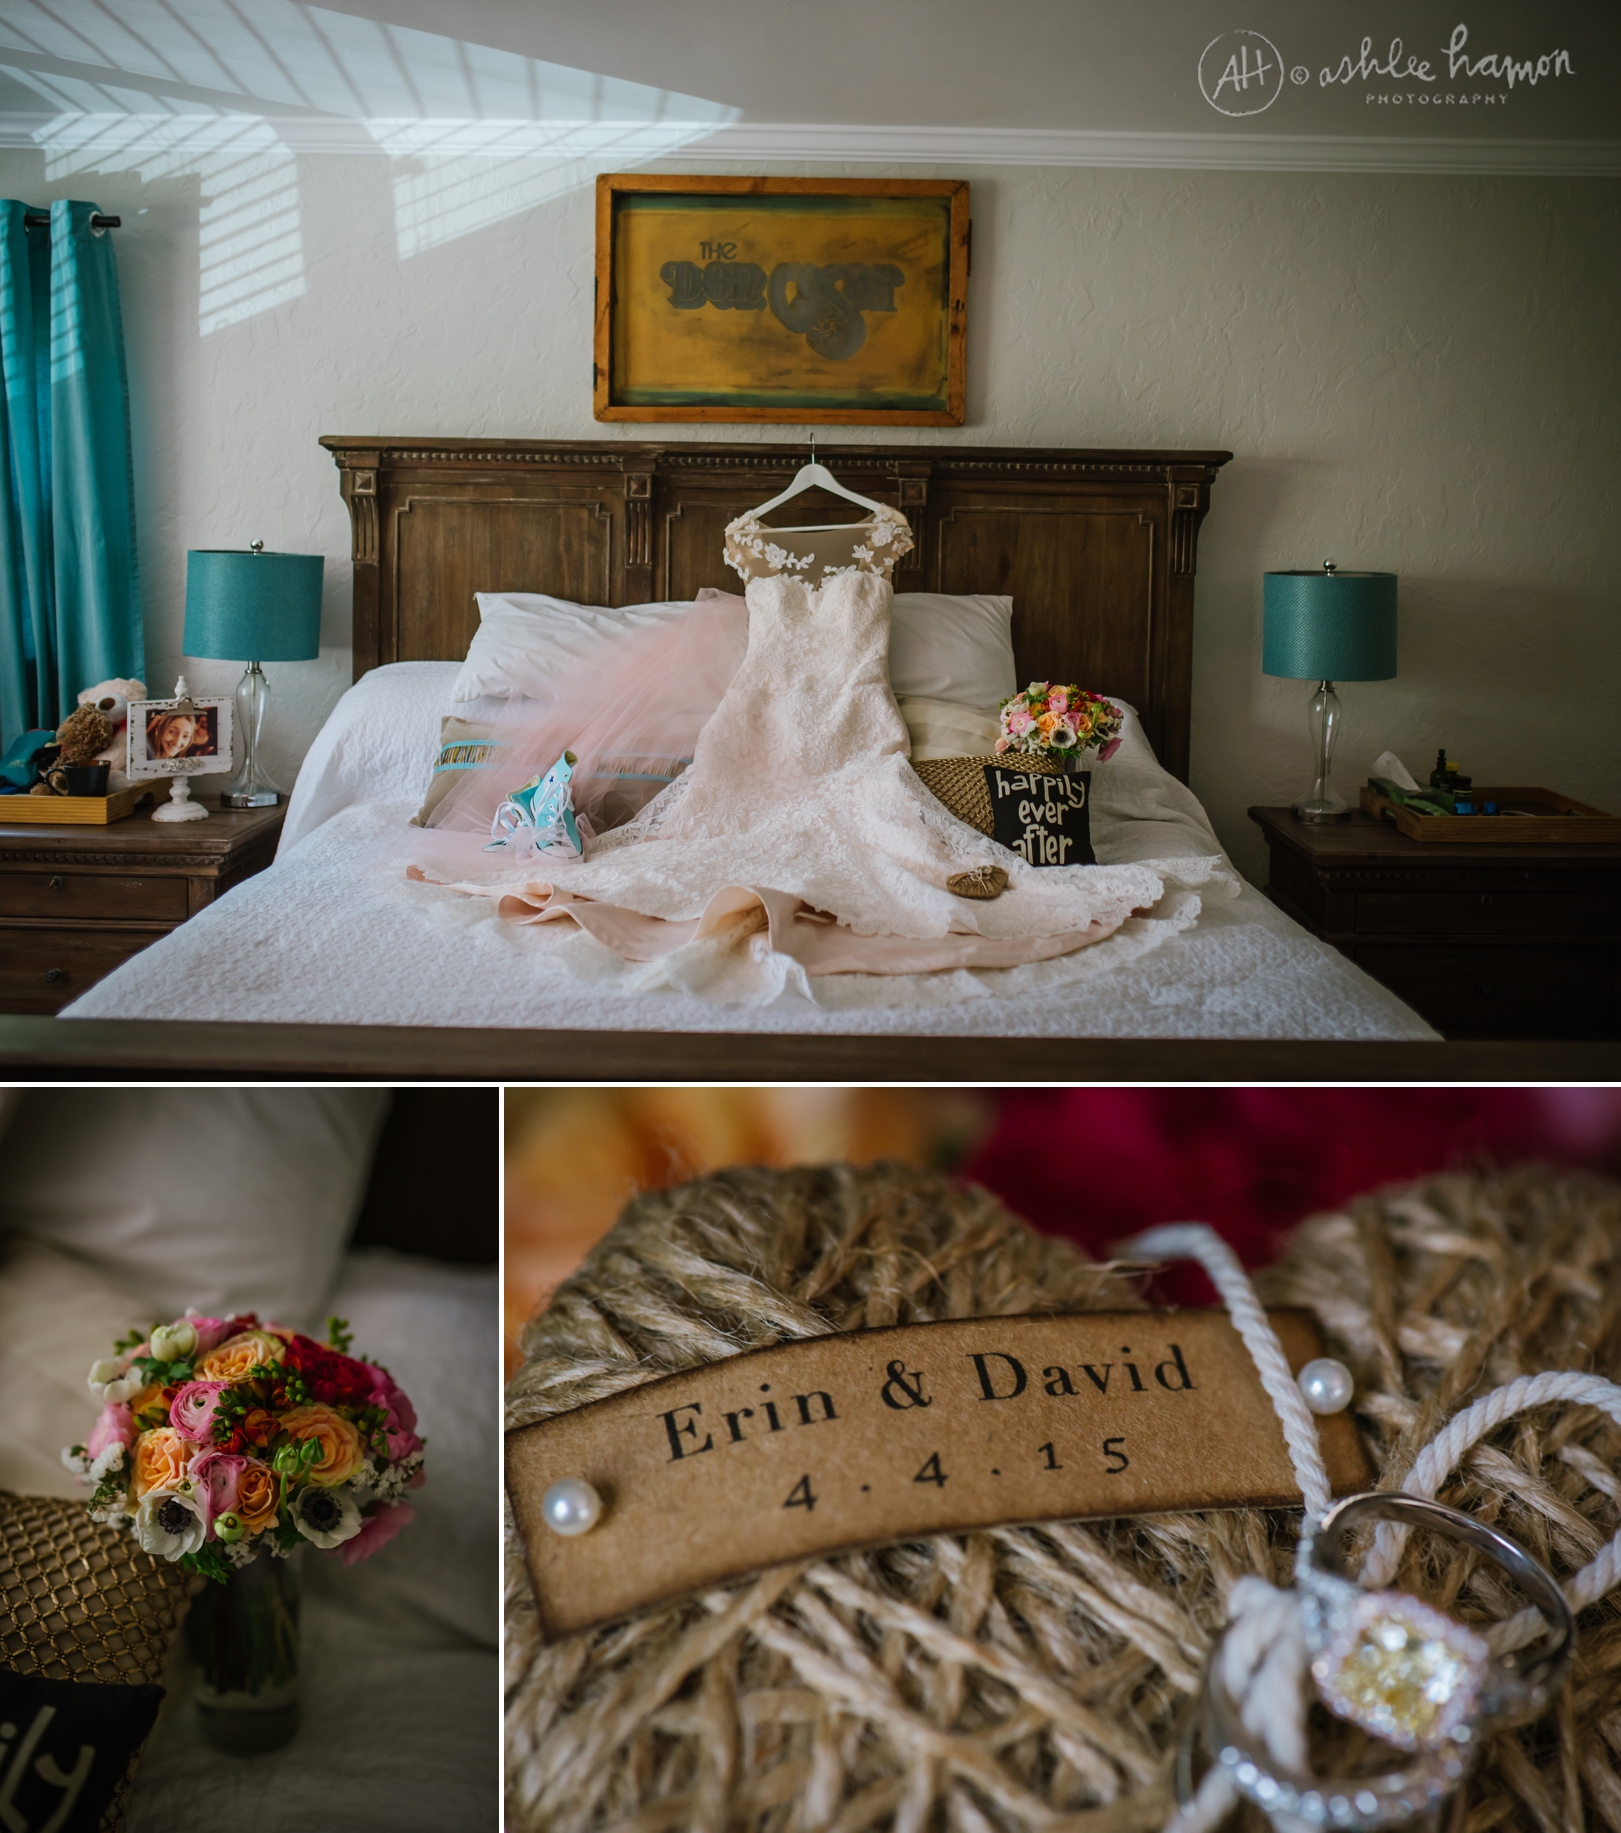 ashlee-hamon-photography-tampa-contemporary-colorful-bed-and-breakfast-wedding_0004.jpg